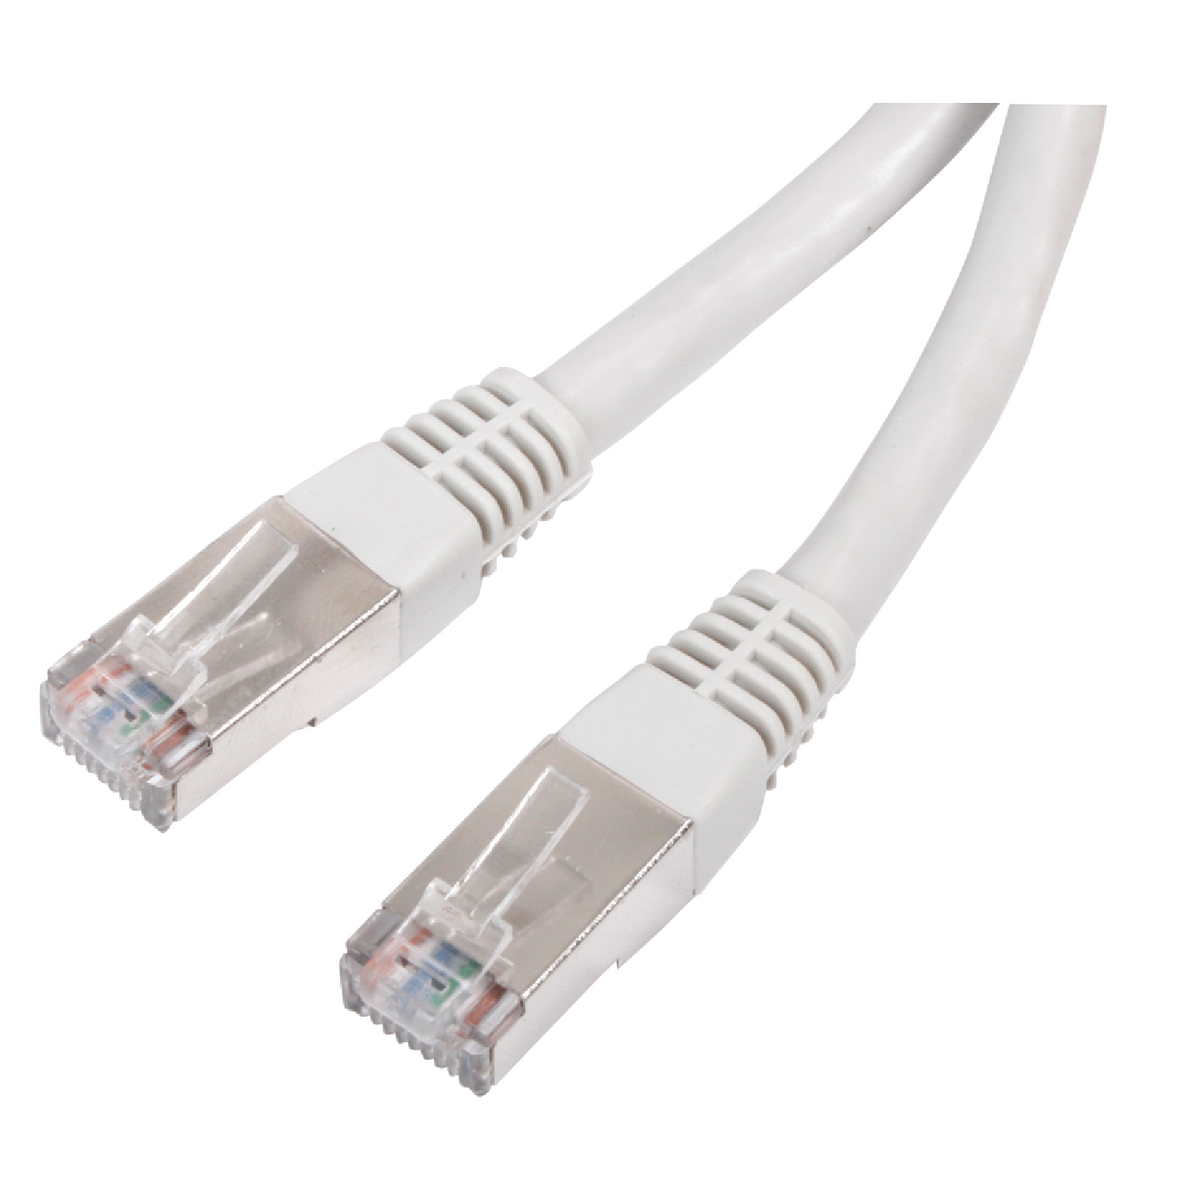 Cat6e Cable Specifications